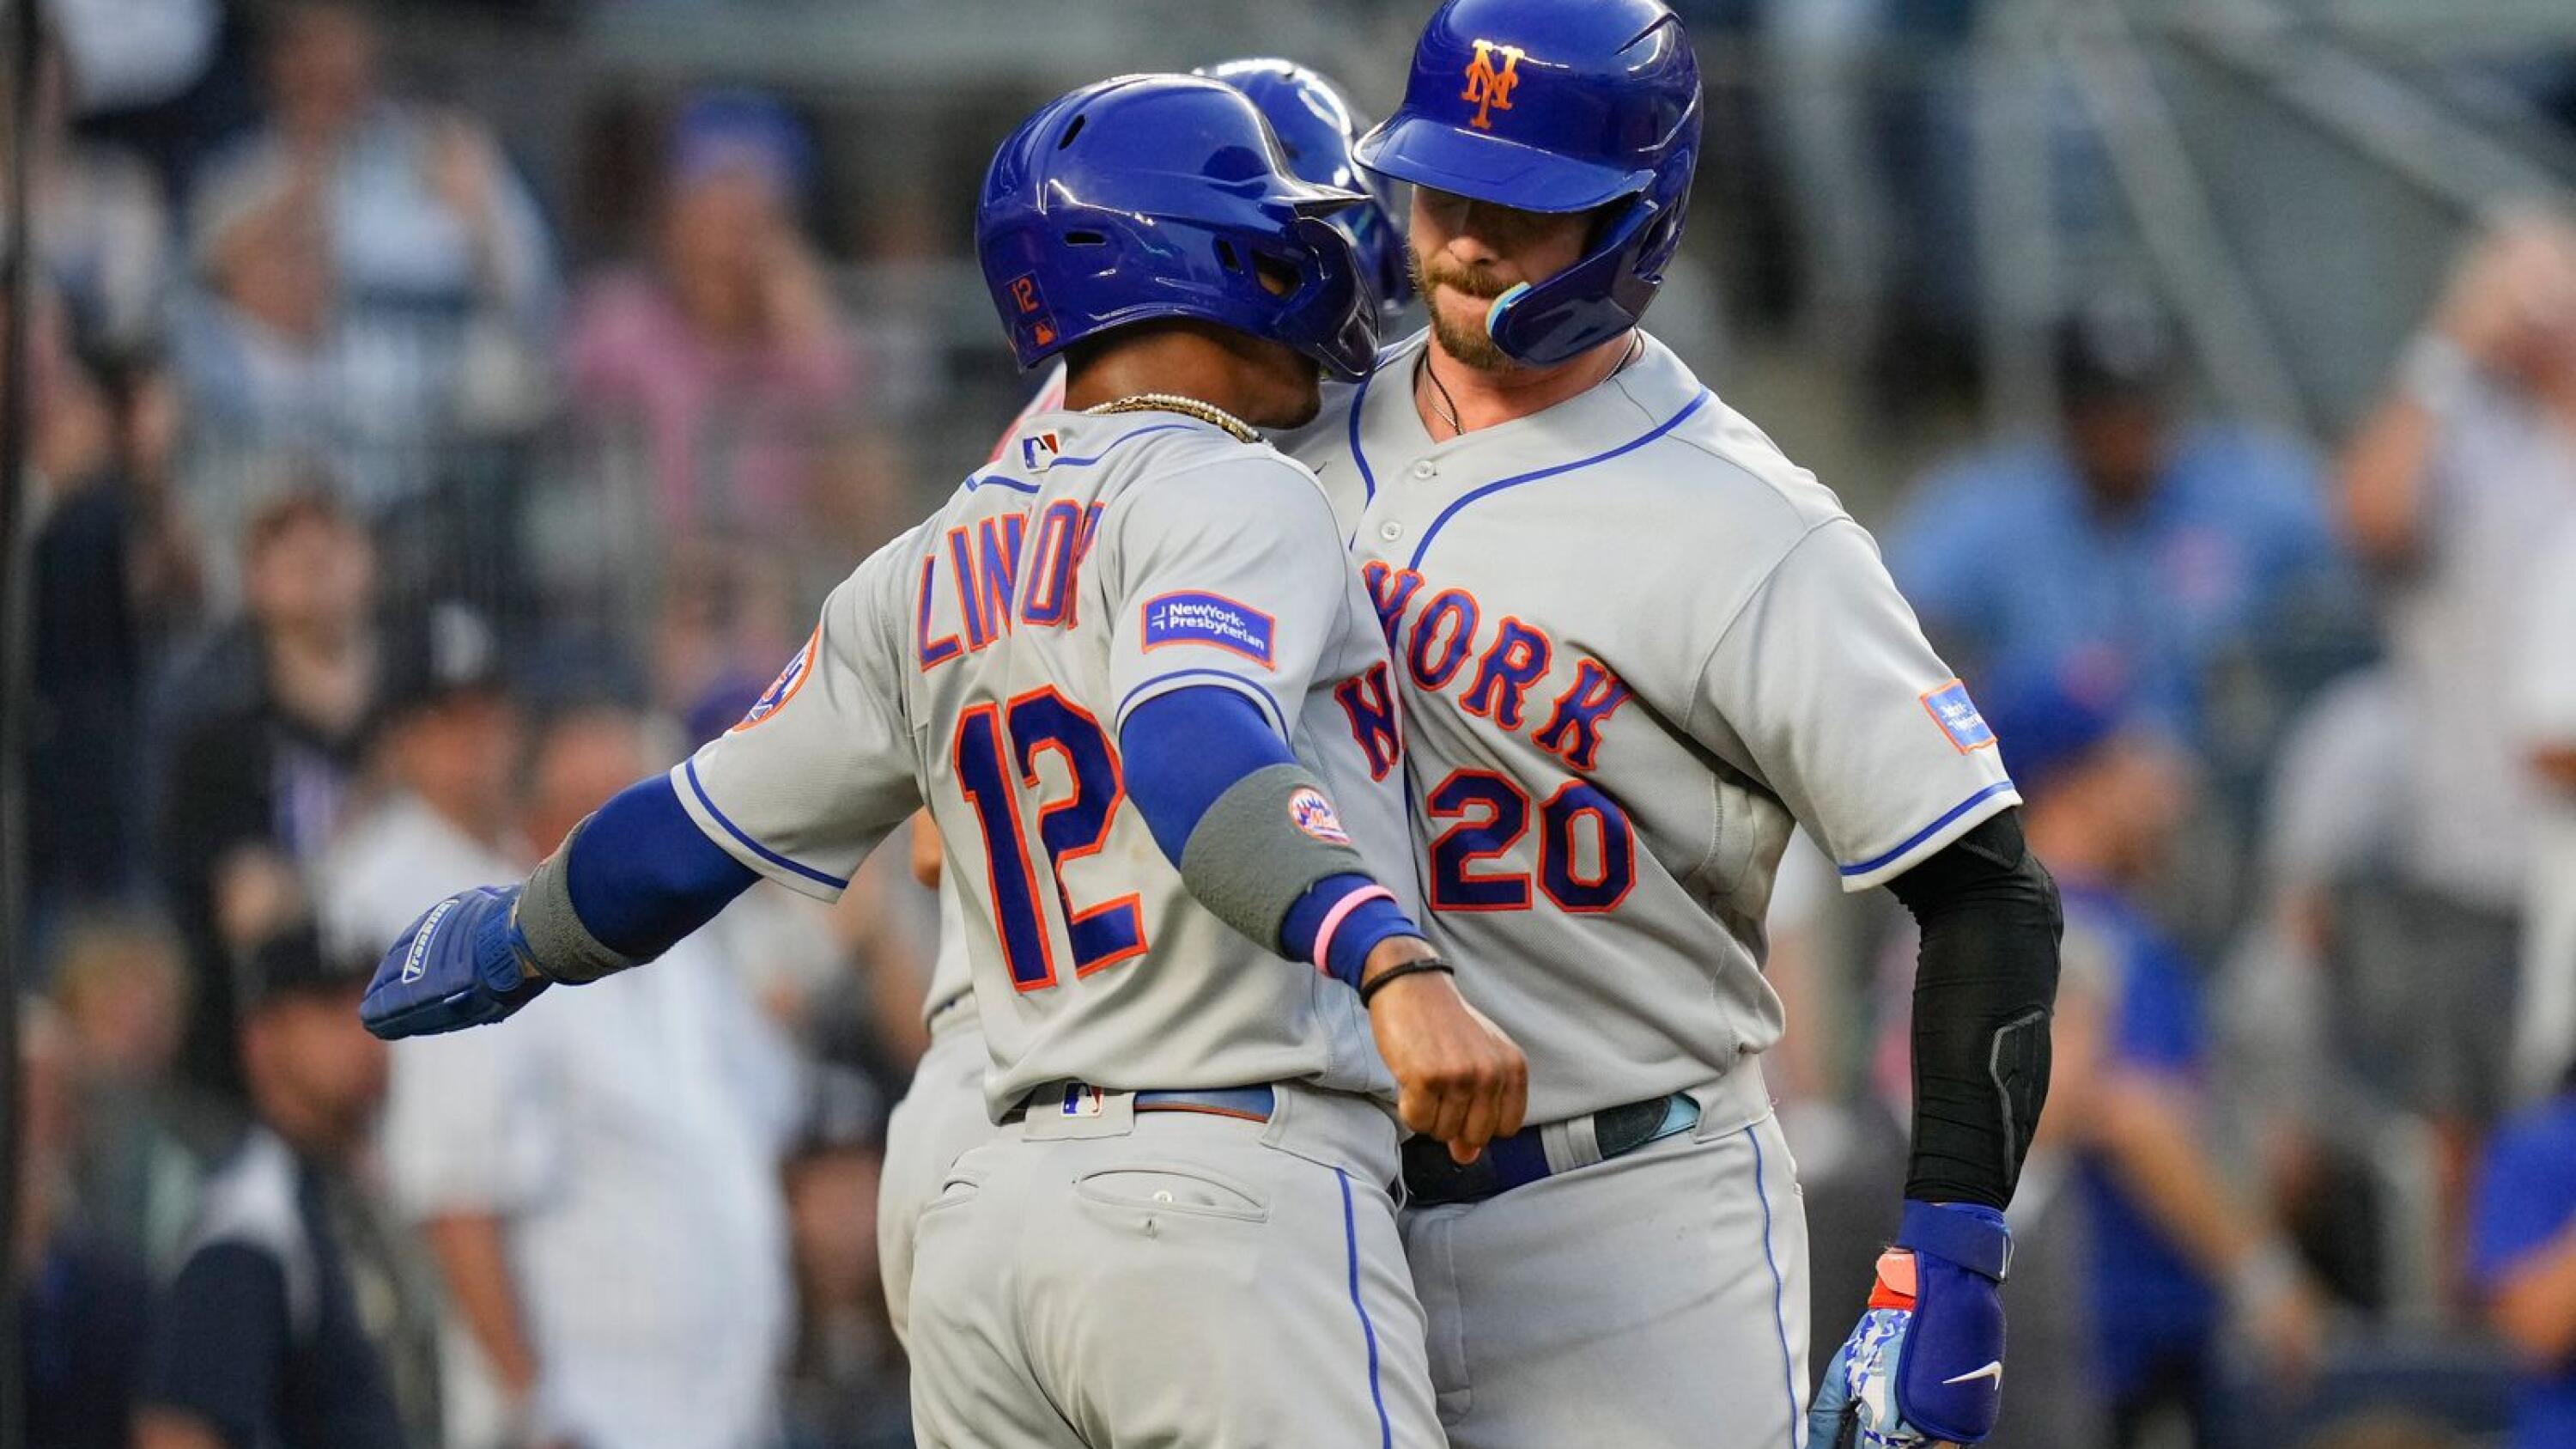 Alonso has a big night as Mets beat the Yankees 9-3 in the Subway